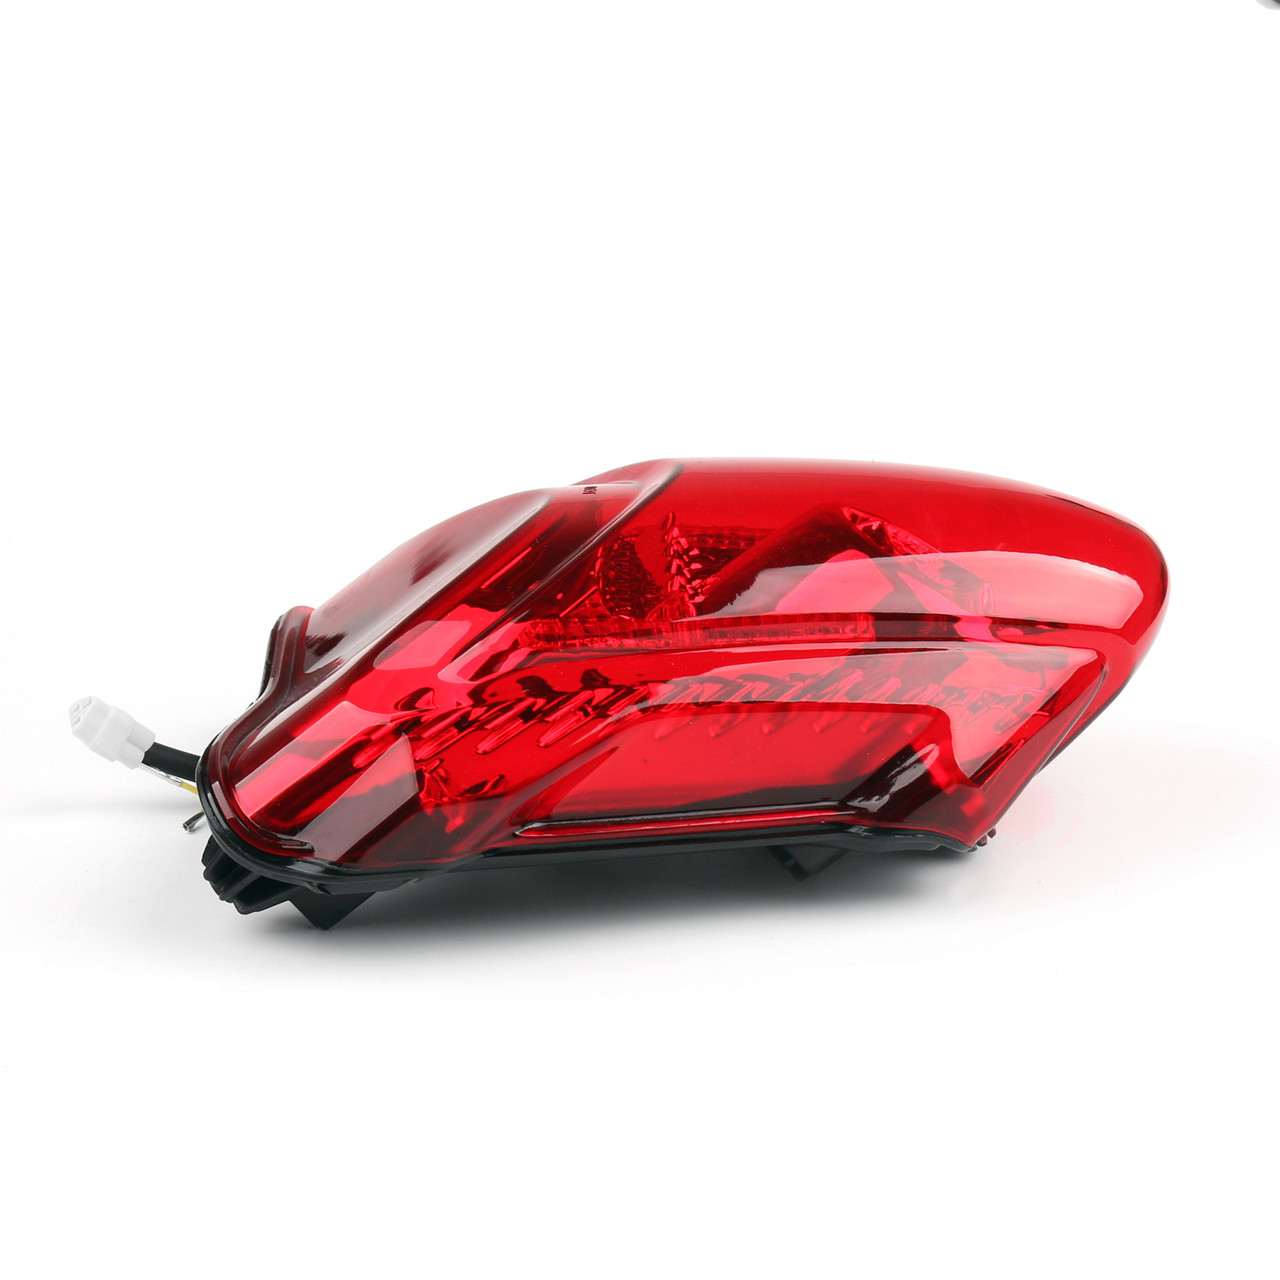 Integrated LED TailLight Turn Signals For Suzuki GSXR 1300 Hayabusa 2008-2014 Red